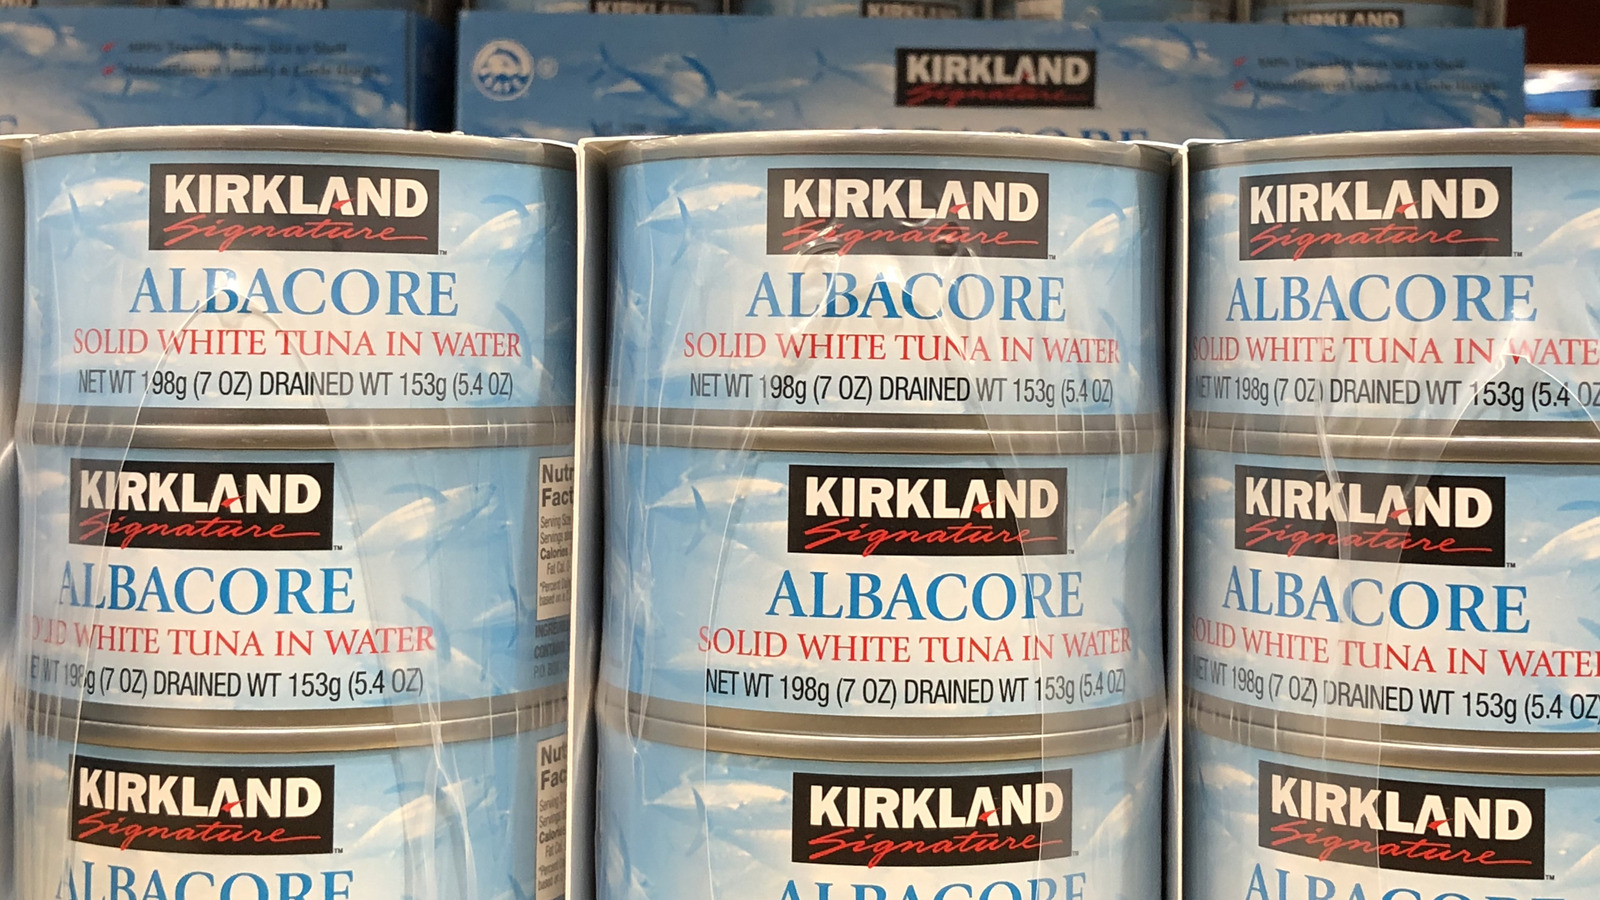 What Brand Is Behind Costco's Kirkland Canned Albacore Tuna?